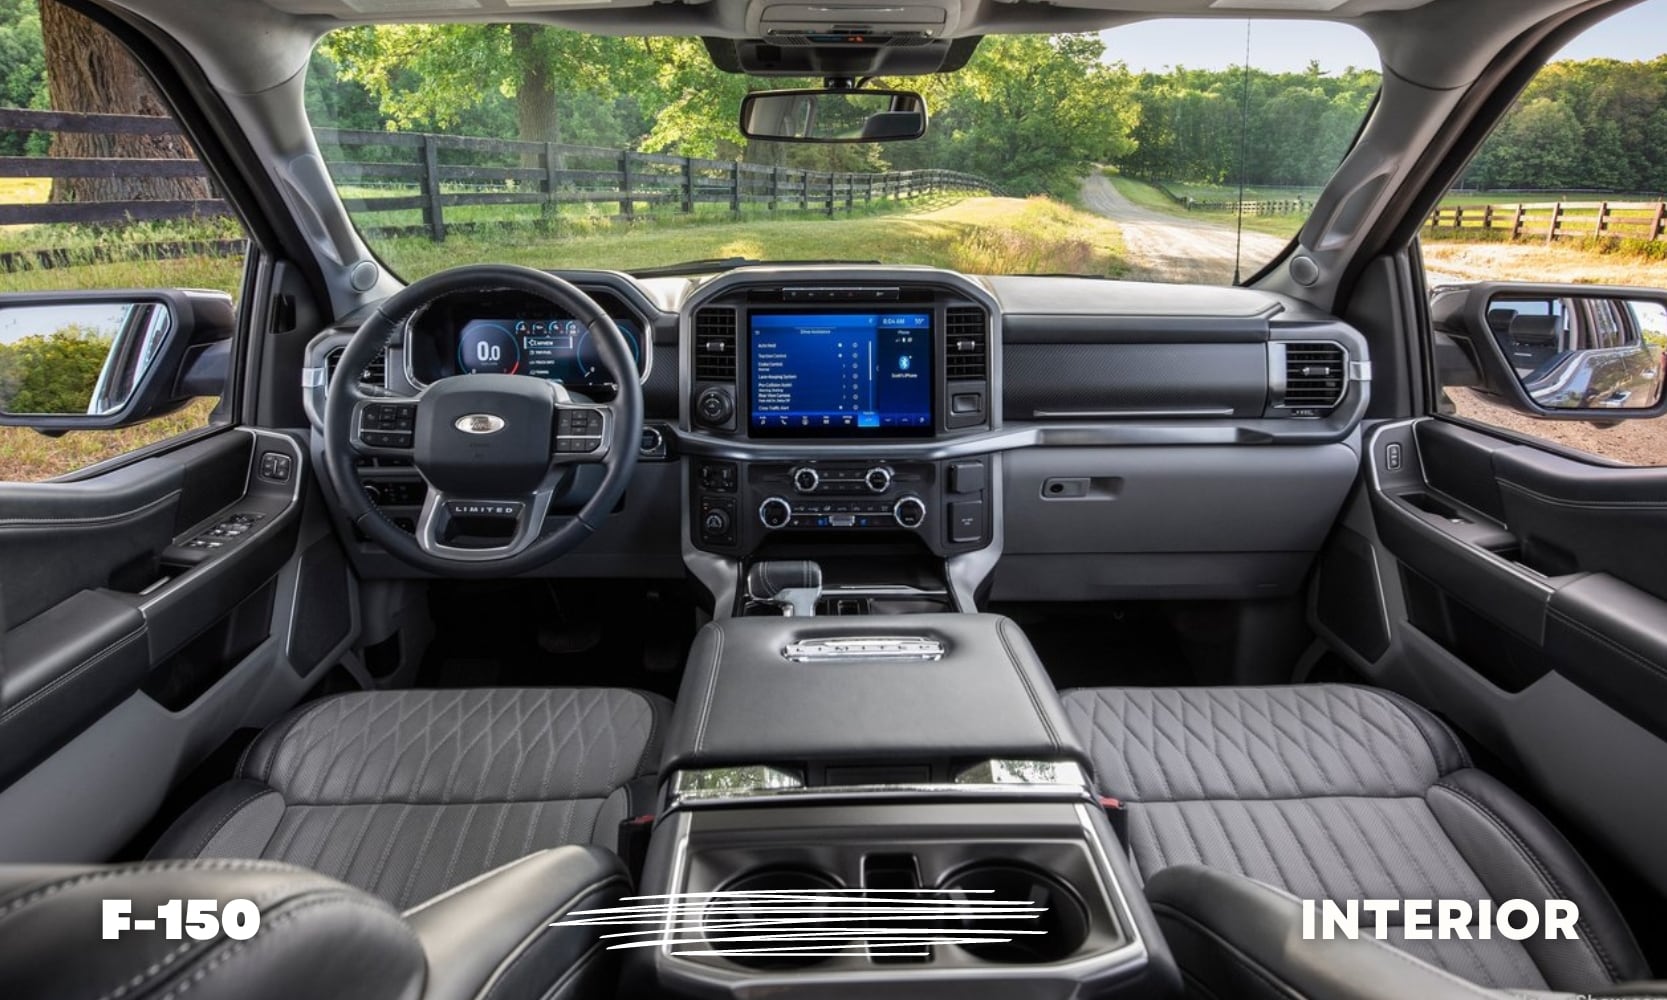 image of the interior front cabin inside a used 2021 Ford F-150 Limited truck from the passenger point of view in the back seat